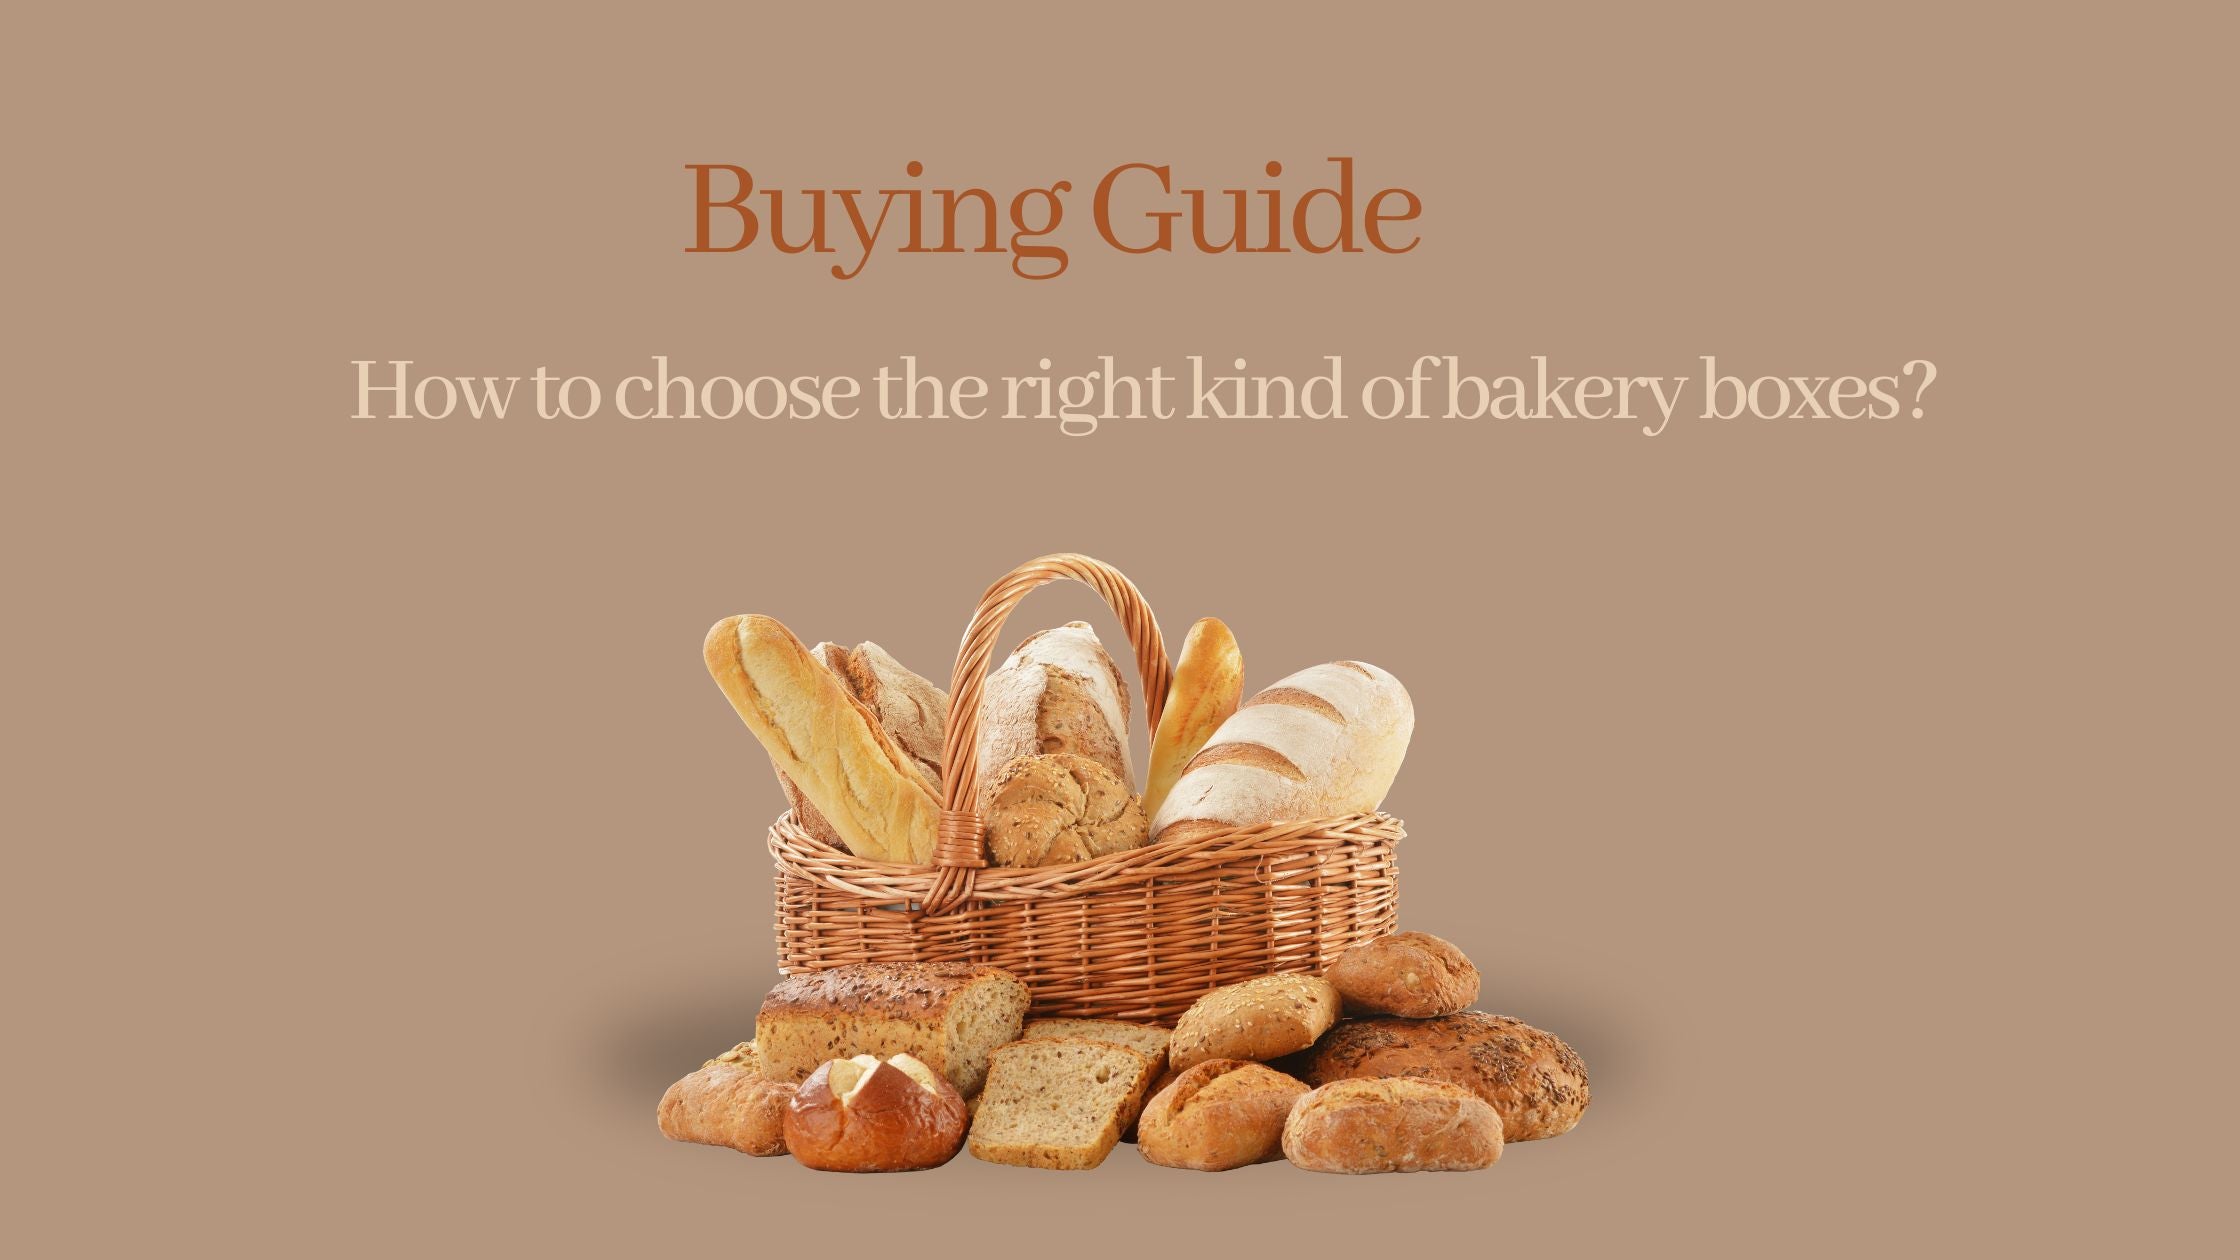 Buying Guide - How to Choose the Right Kind of Bakery Boxes?